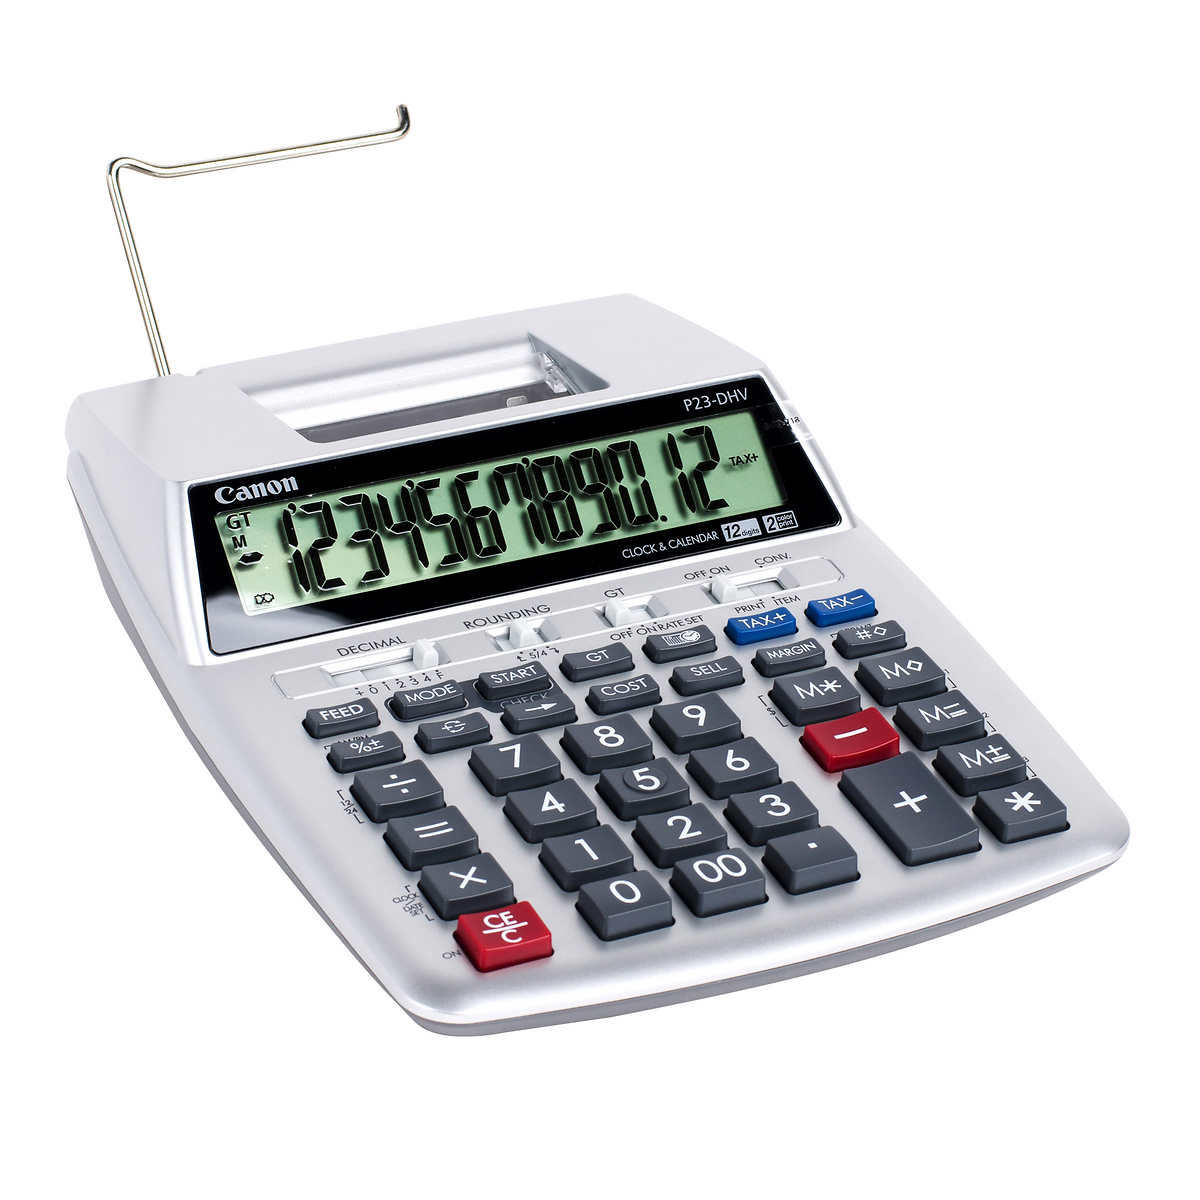 Canon P23-DHV Printing Calculator for sale online 